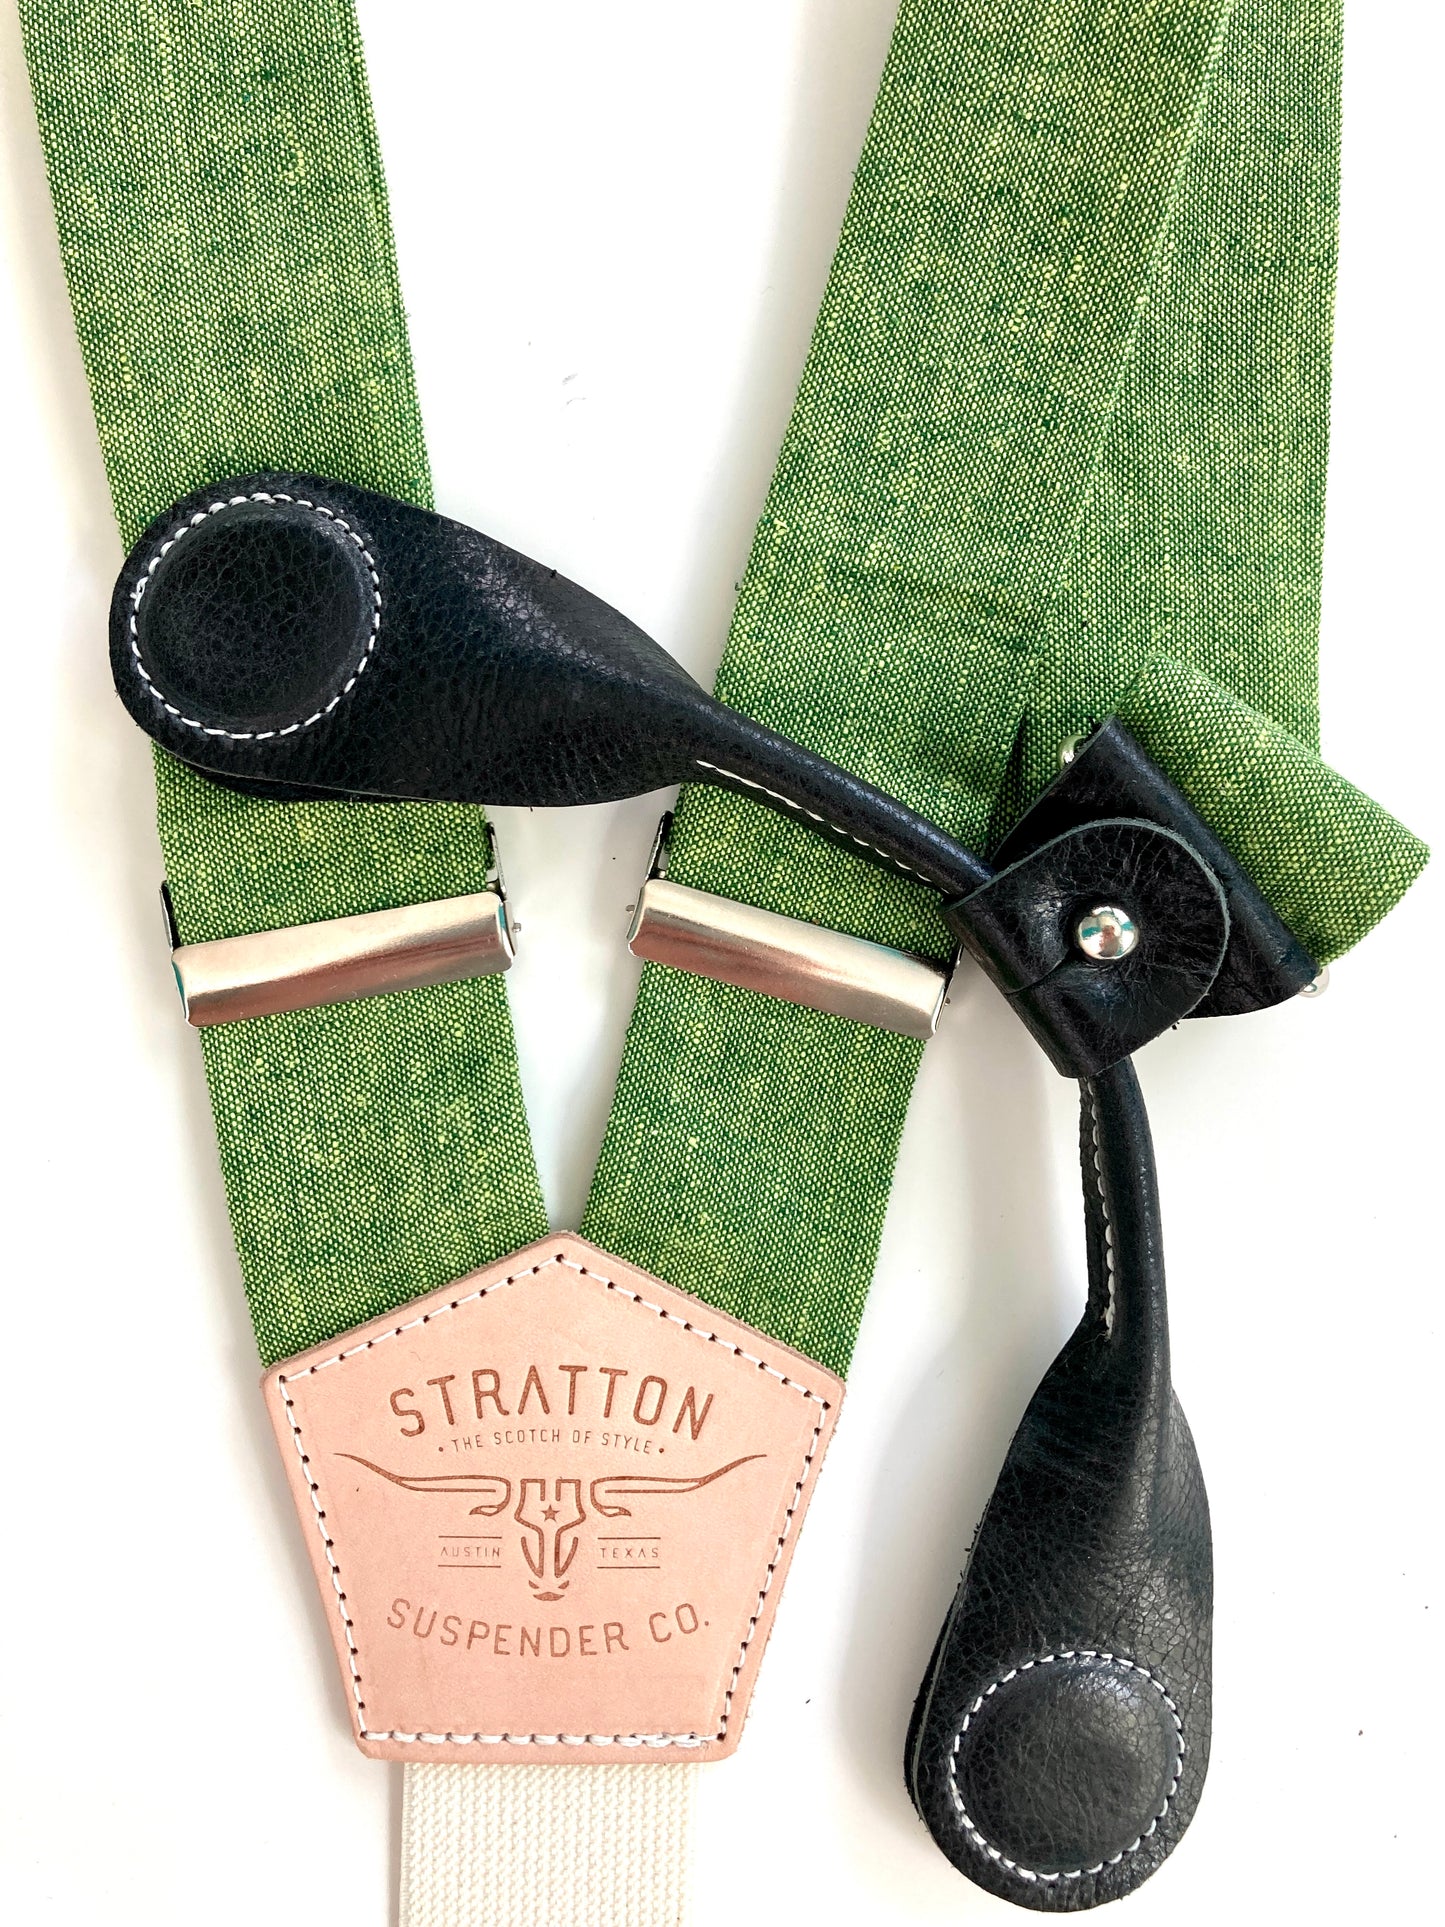 Stratton Suspender Co. features our Spruce (bright green) linen suspenders on veg tan shoulder leather with cream colored elastic back strap for the Fall 2022 suspenders collection Magnetic Stratton Suspender clasps in Black Pontedero Italian leather hand-picked by Stratton Suspender Co